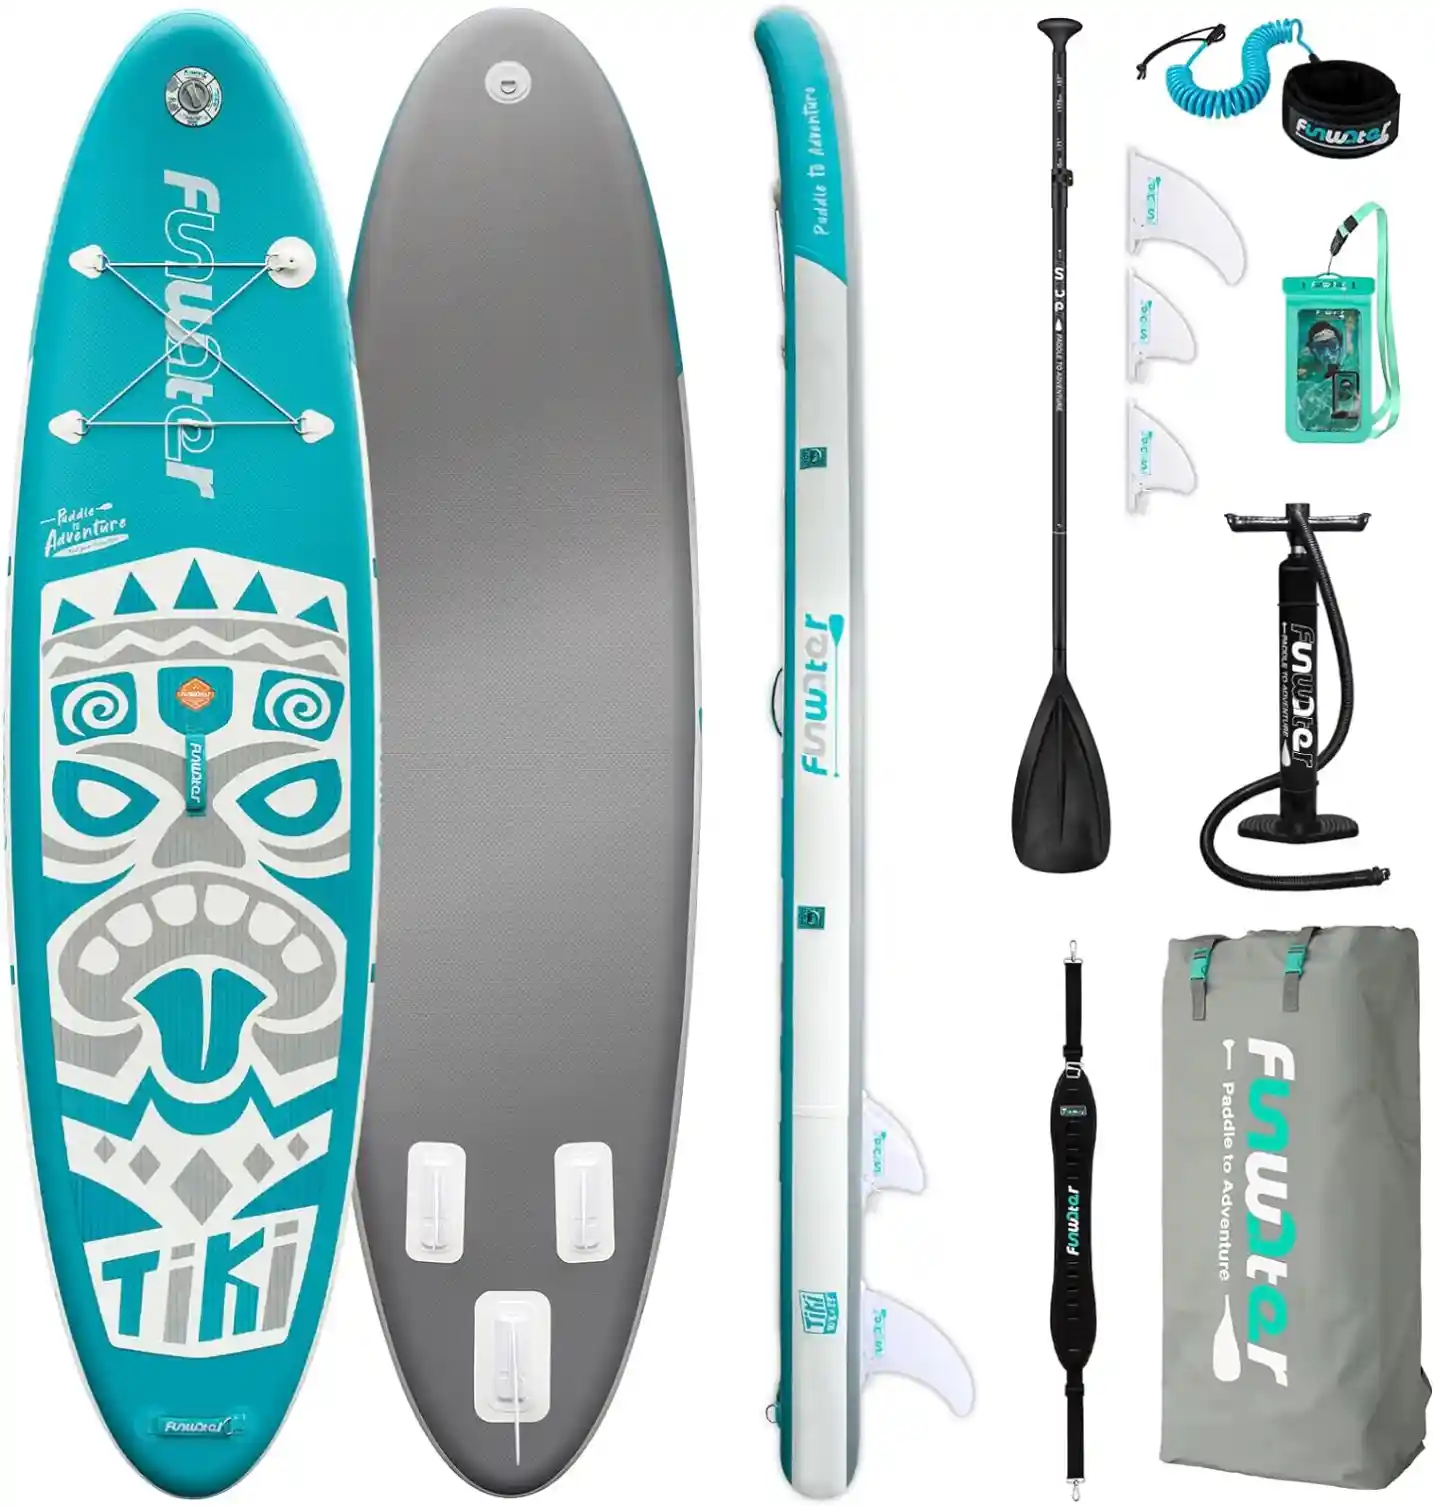 Meilleur paddle board gonflable pas cher au Quebec FunWater